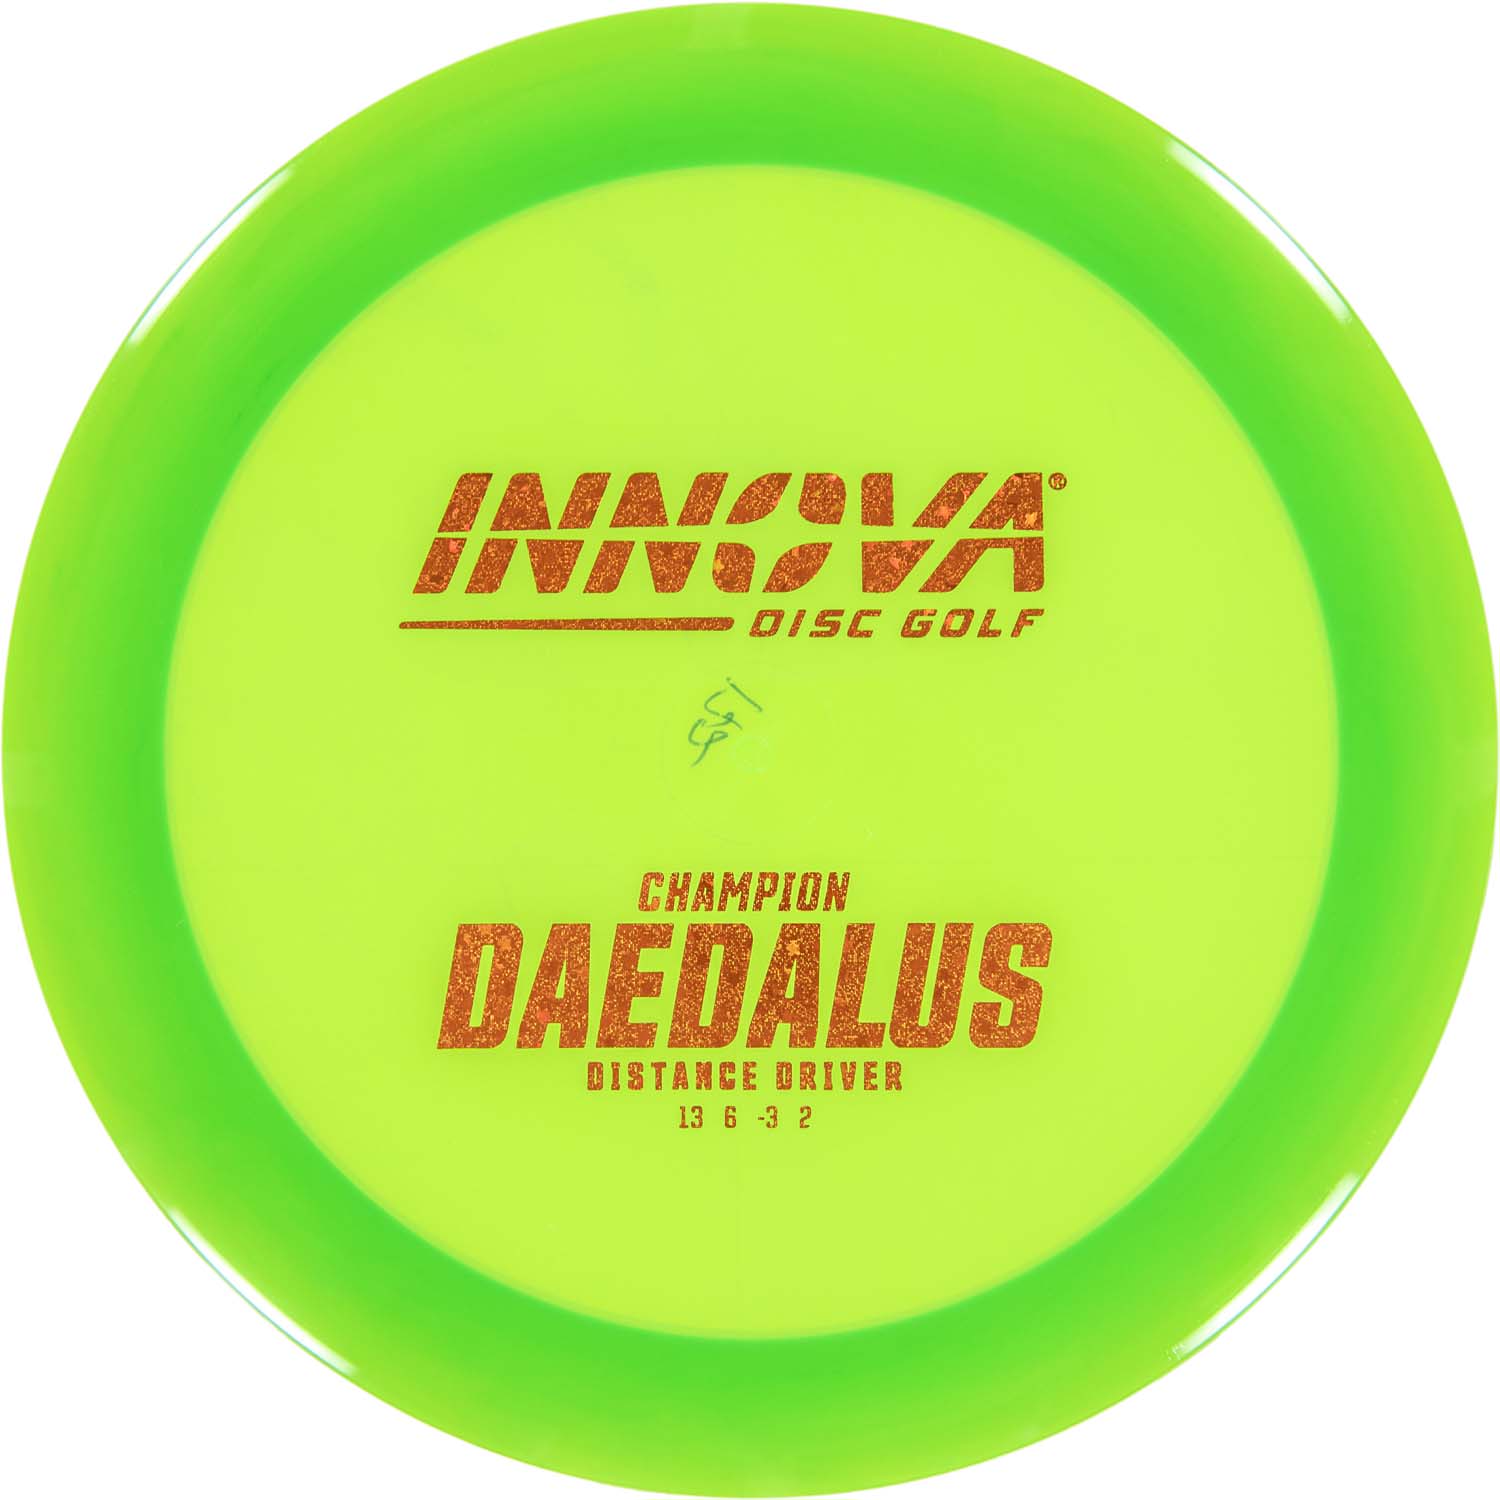 Champion Daedalus from Disc Golf United